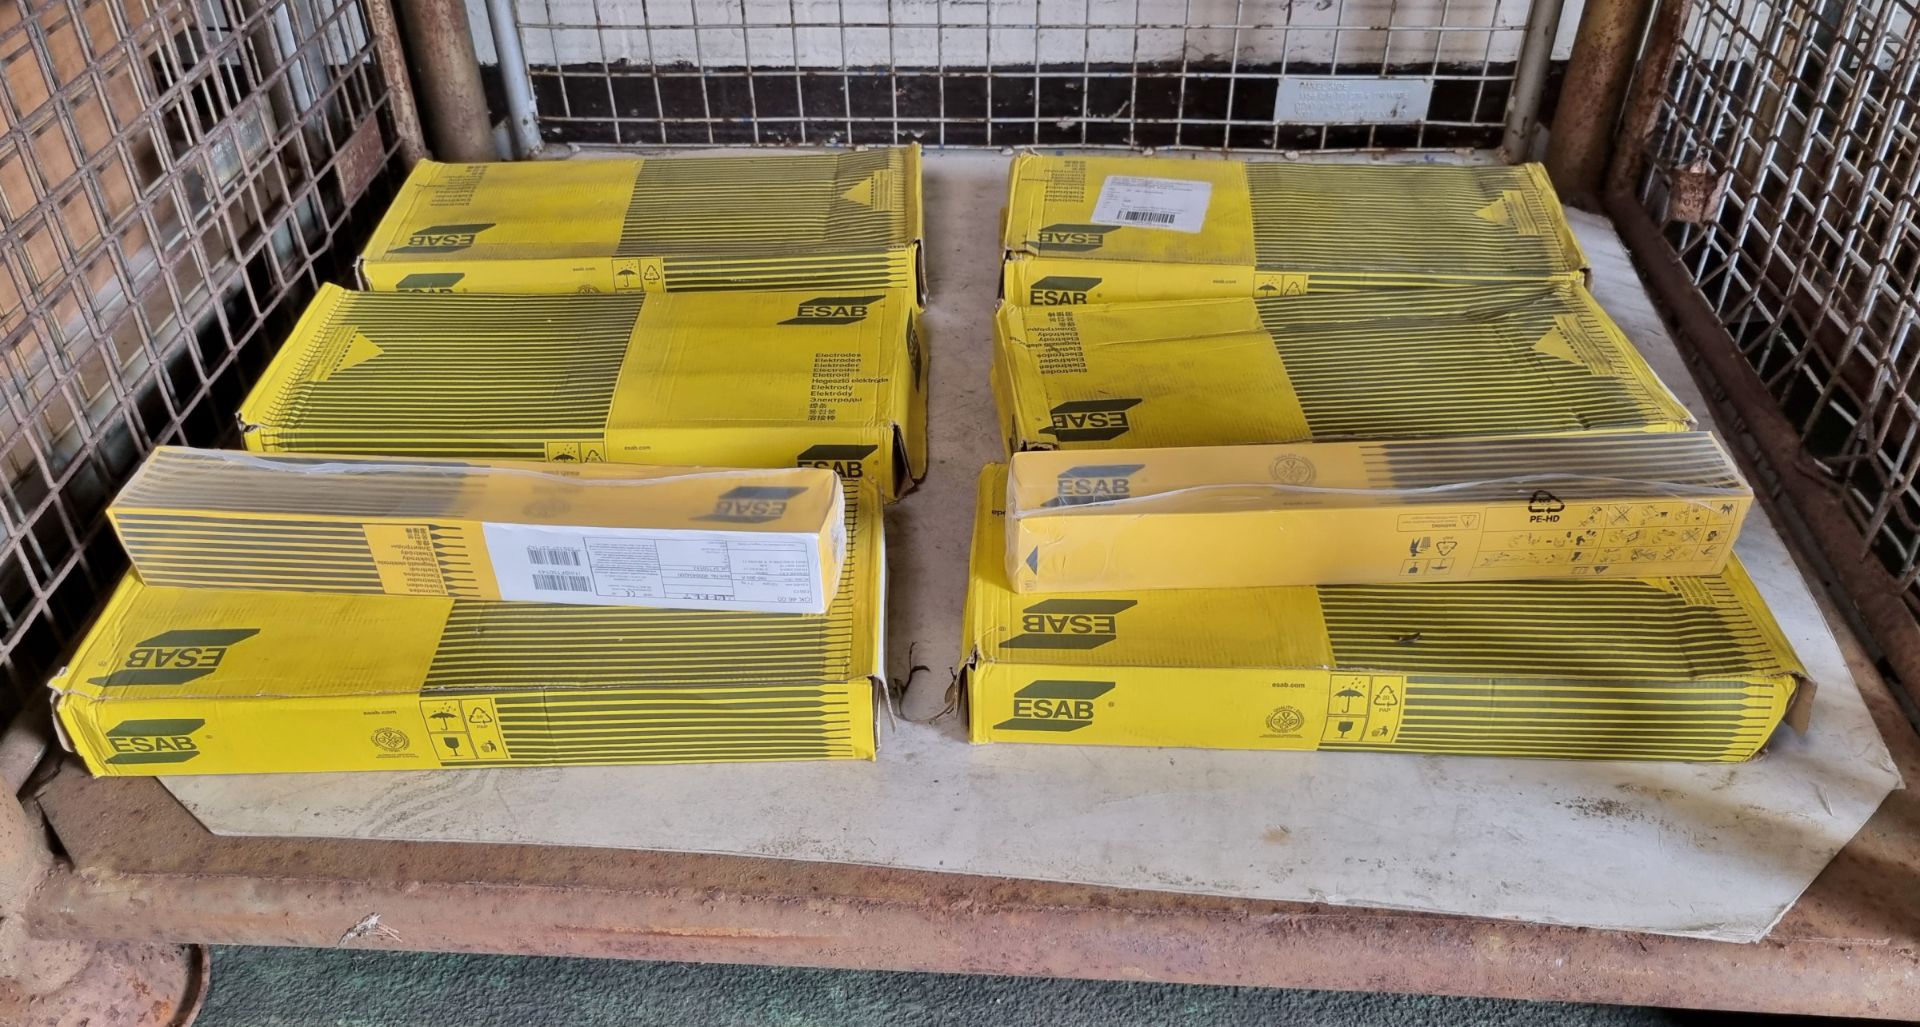 ESAB Welding rods - 4.0 x 450mm 21.3 kg - 6 boxes - Image 2 of 4